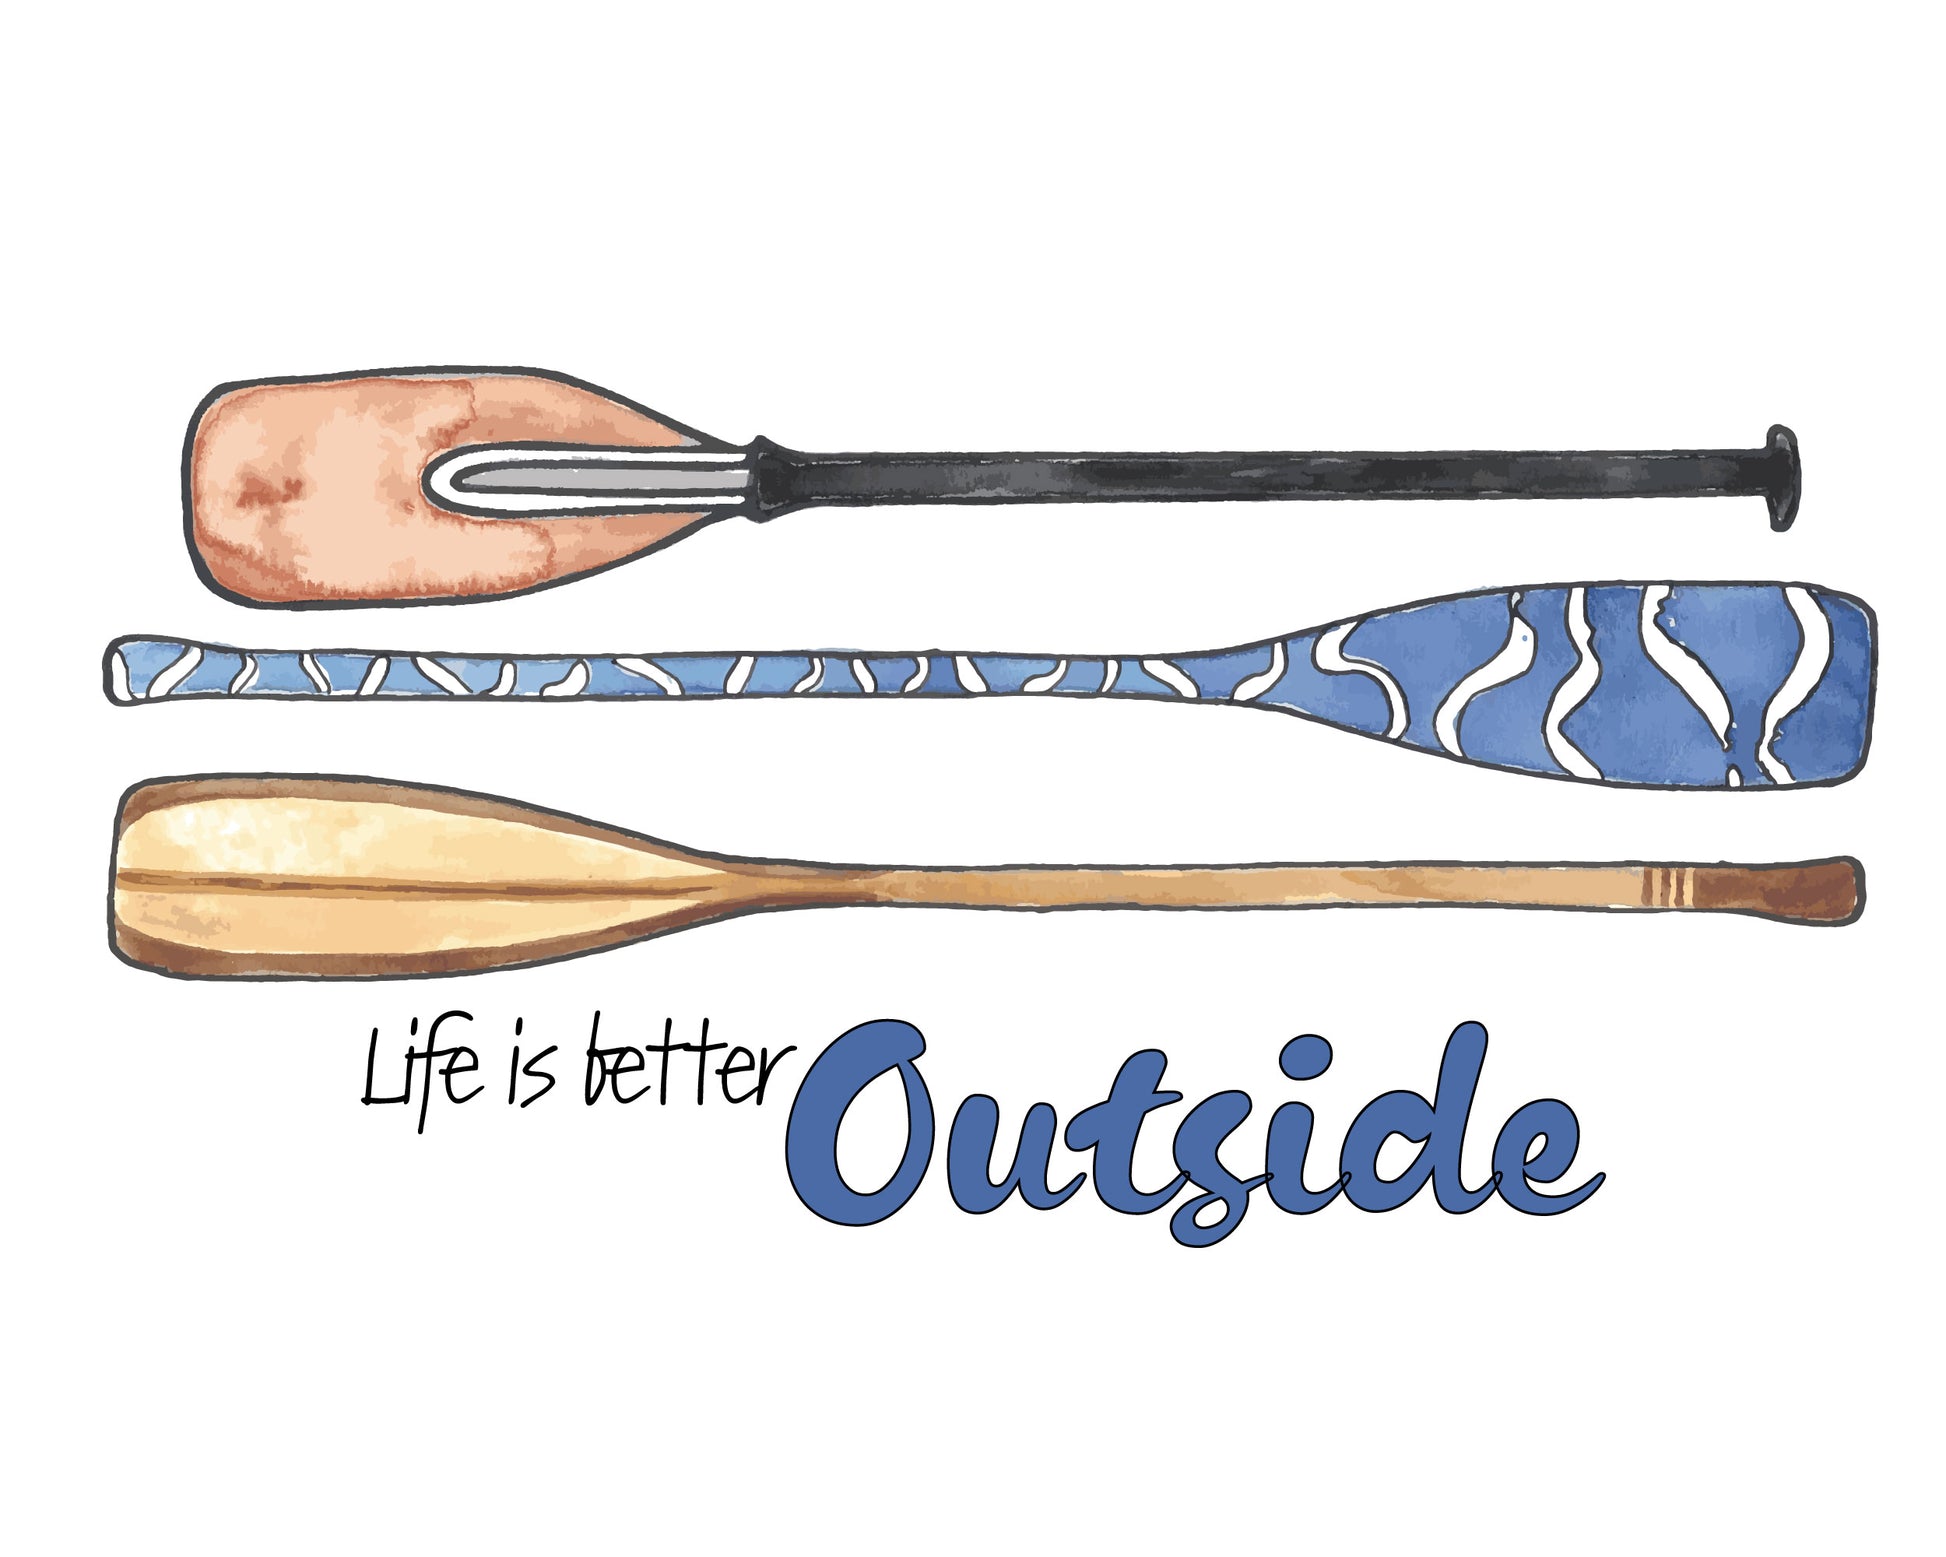 Art Print of a watercolor painting by Michigan artist Abigail Powers.  This print featuring three boat oars gives a feeling of warmth like Summertime and make you think of days on the lake. The saying reads “Life is better outside.” Well, because it really is! T